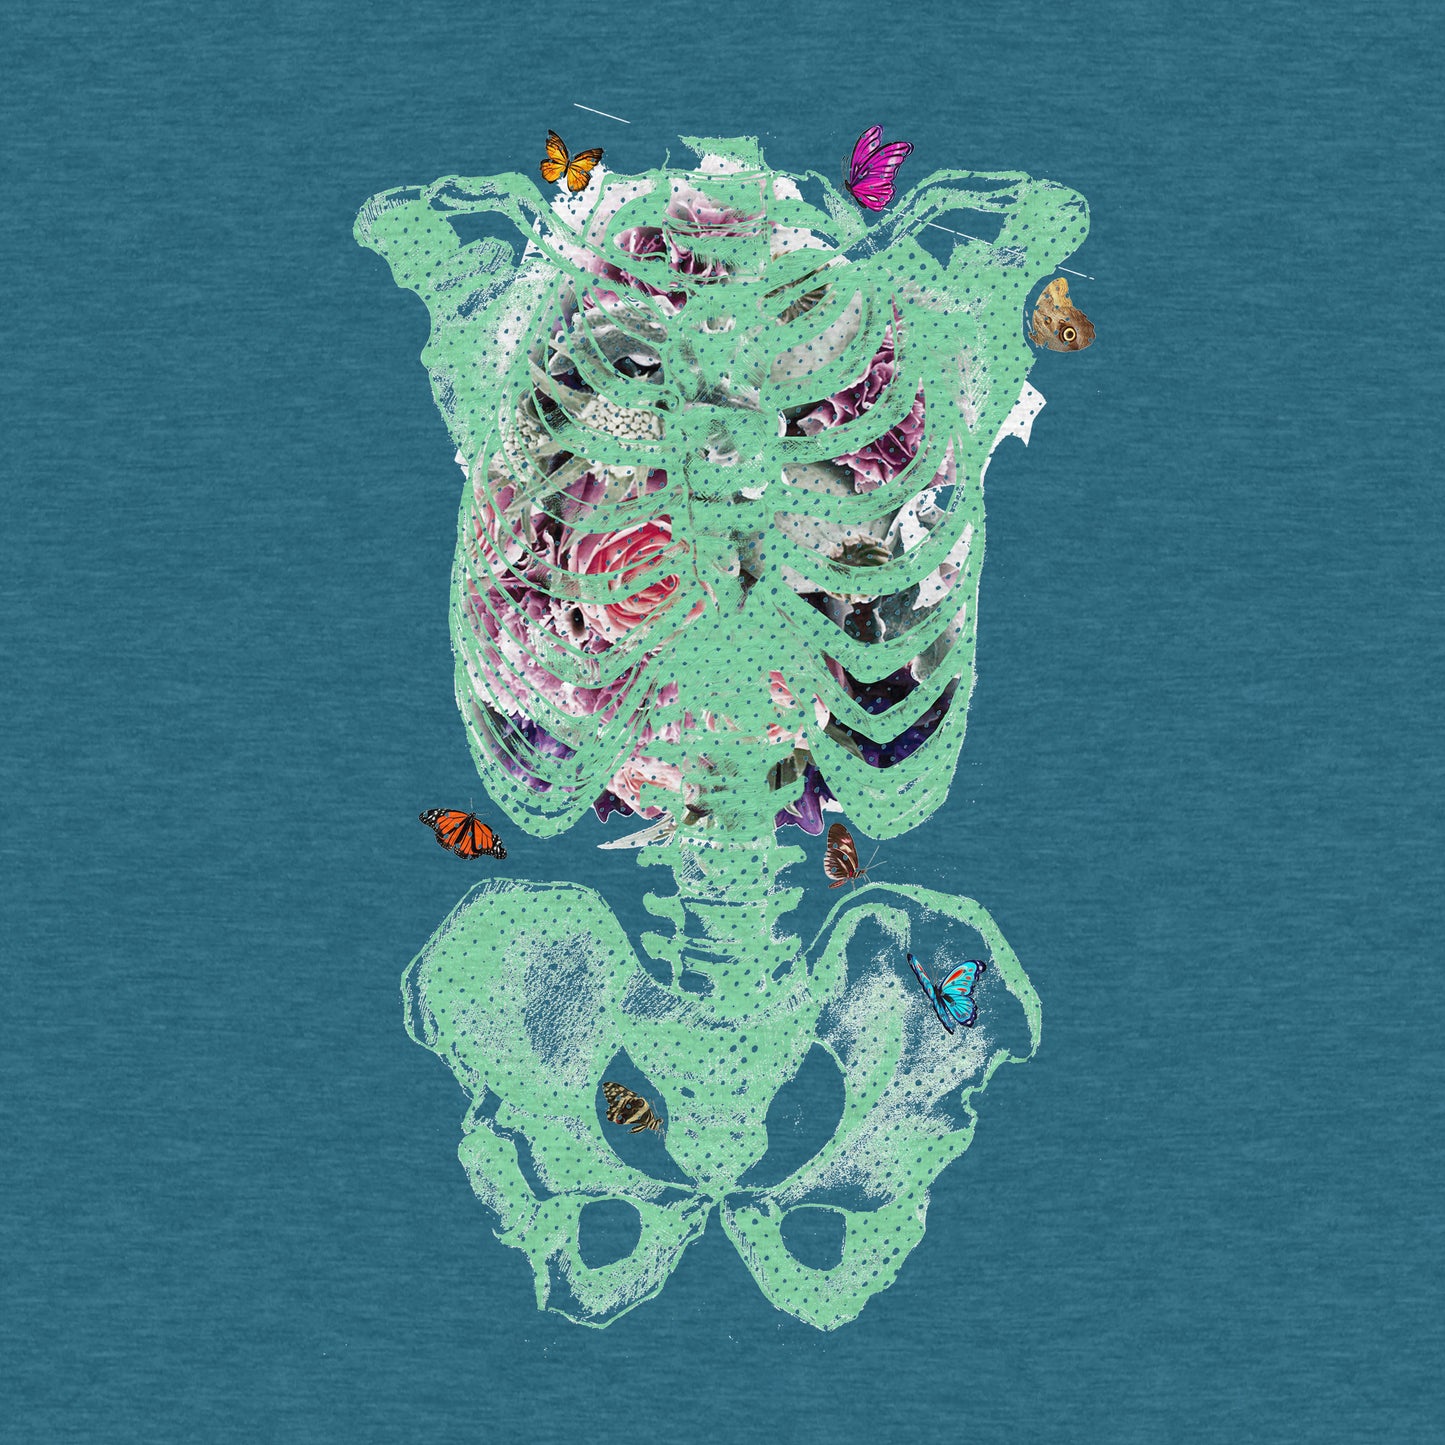 Spring Skeleton, Rib Cage, Floral - Women's Relaxed Cotton/Poly Tee